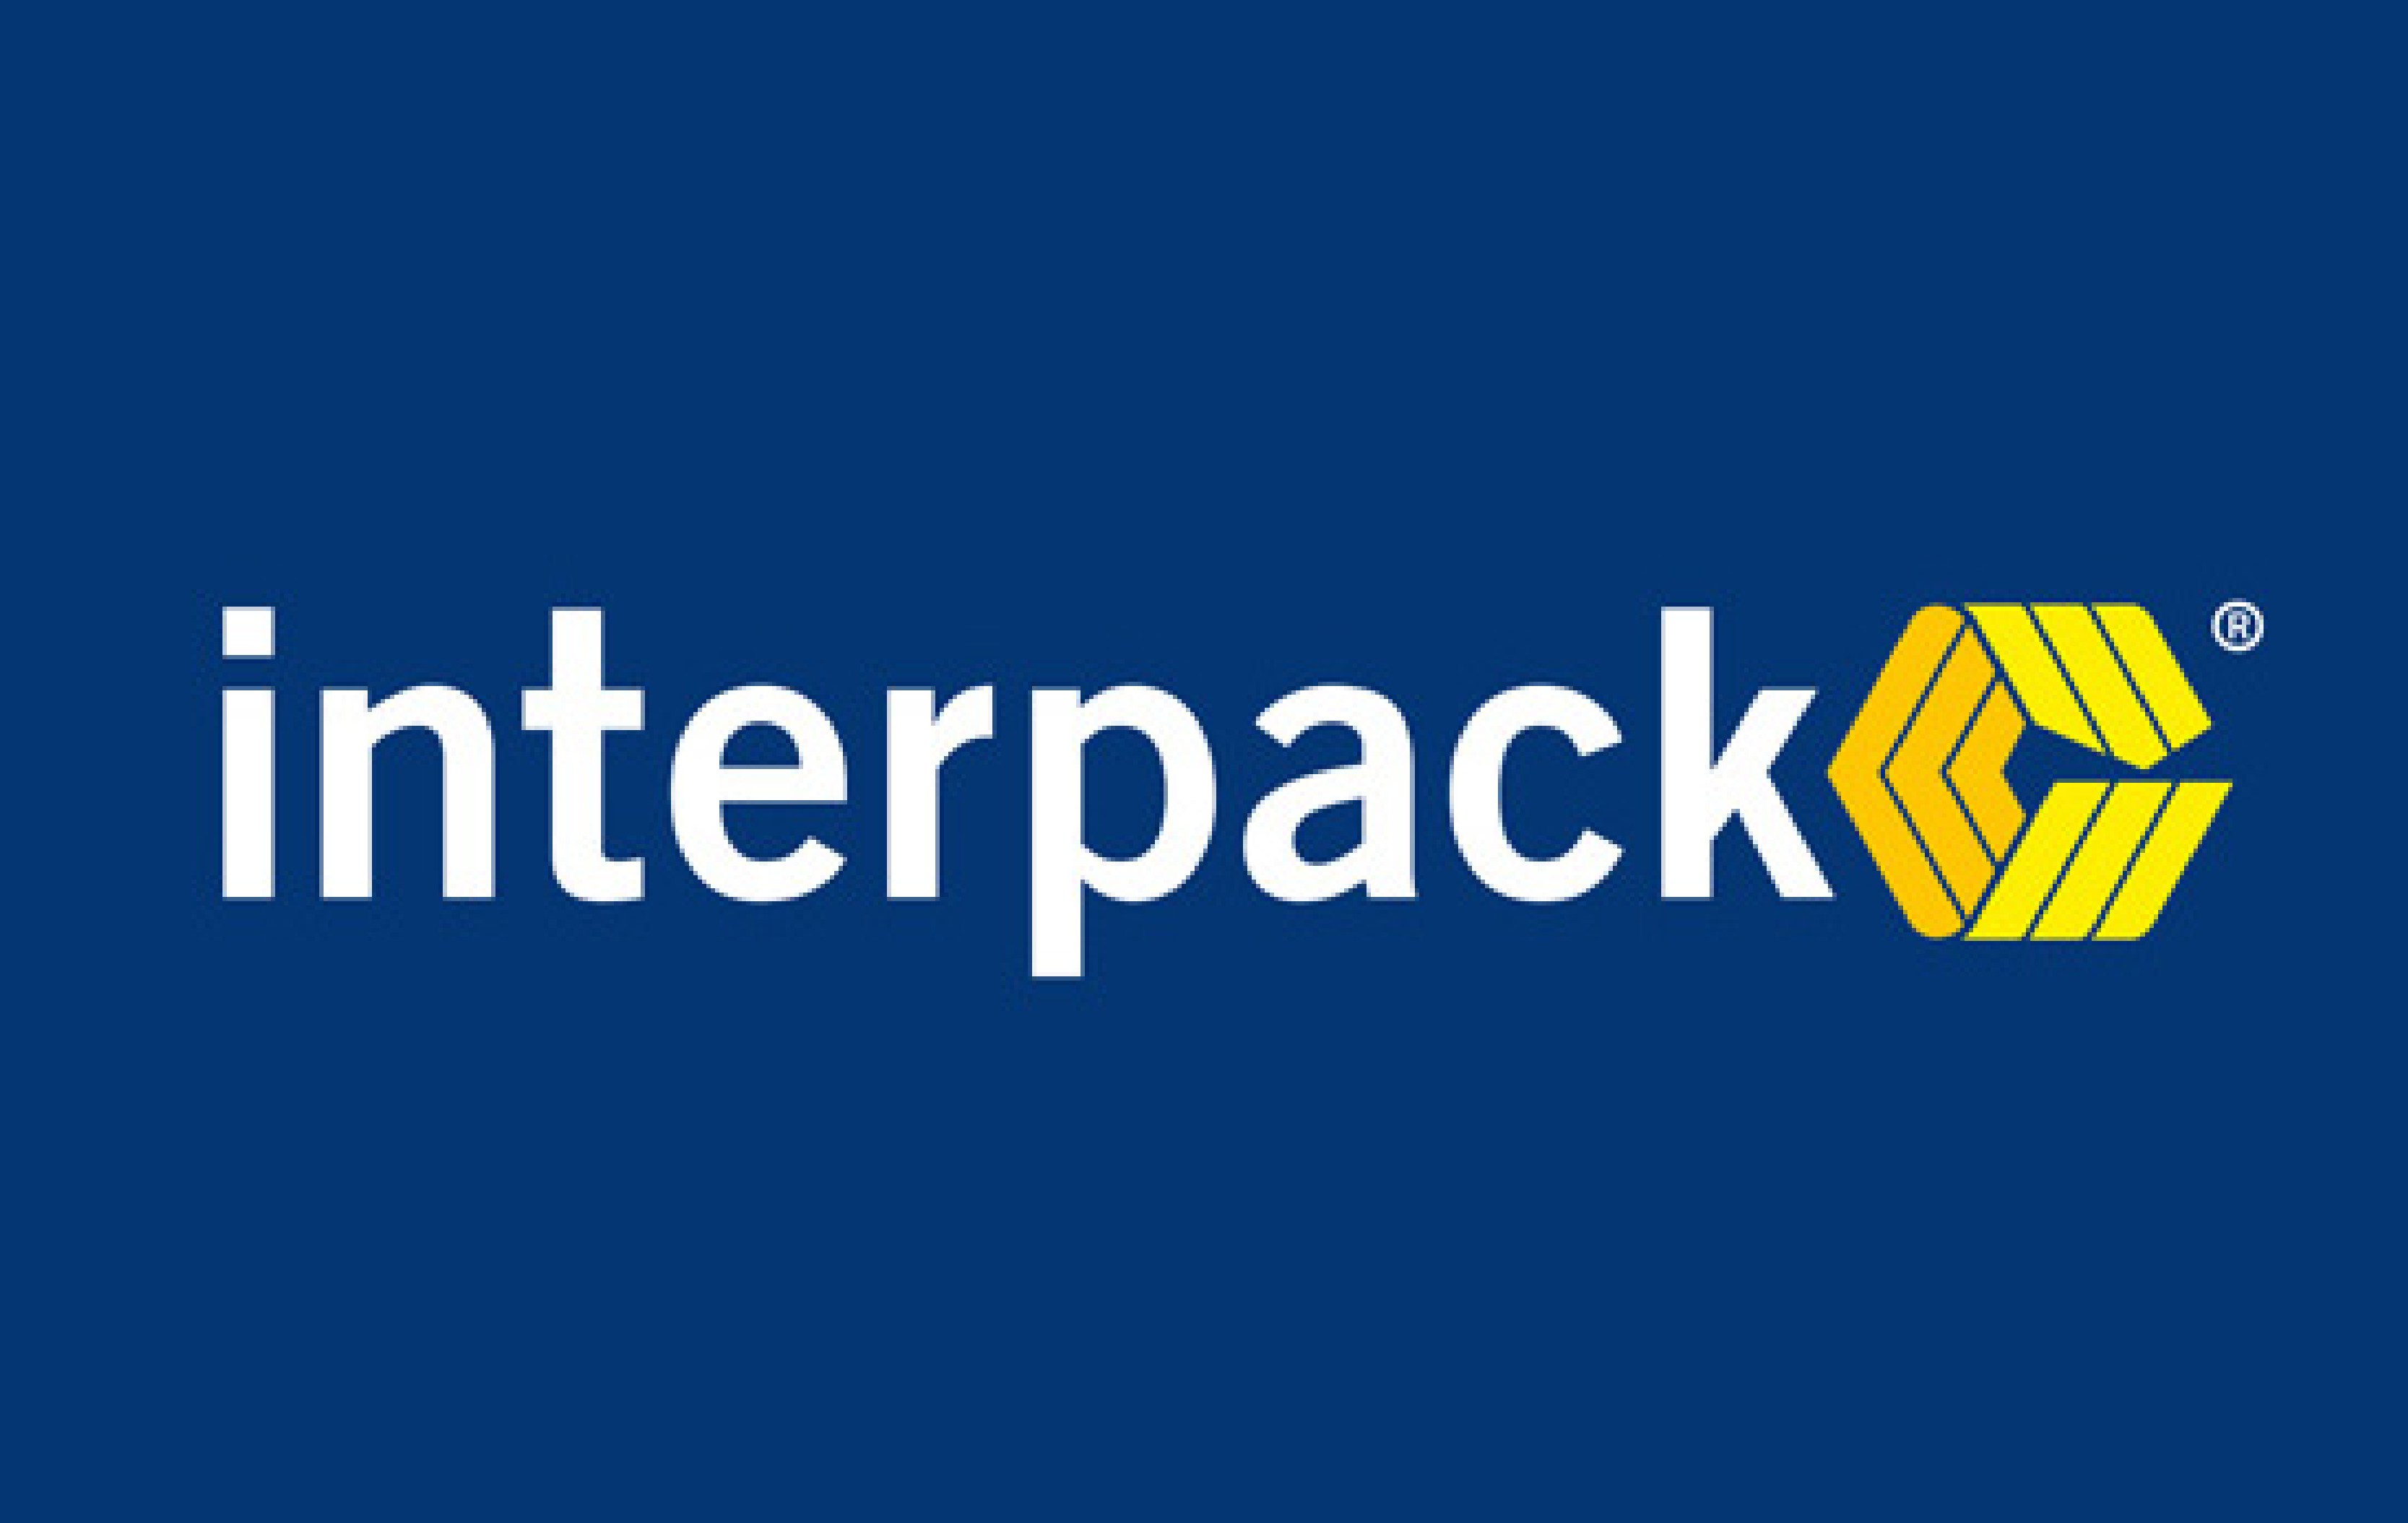 You are currently viewing Interpack, 23 Feb – 3 Mar 2021